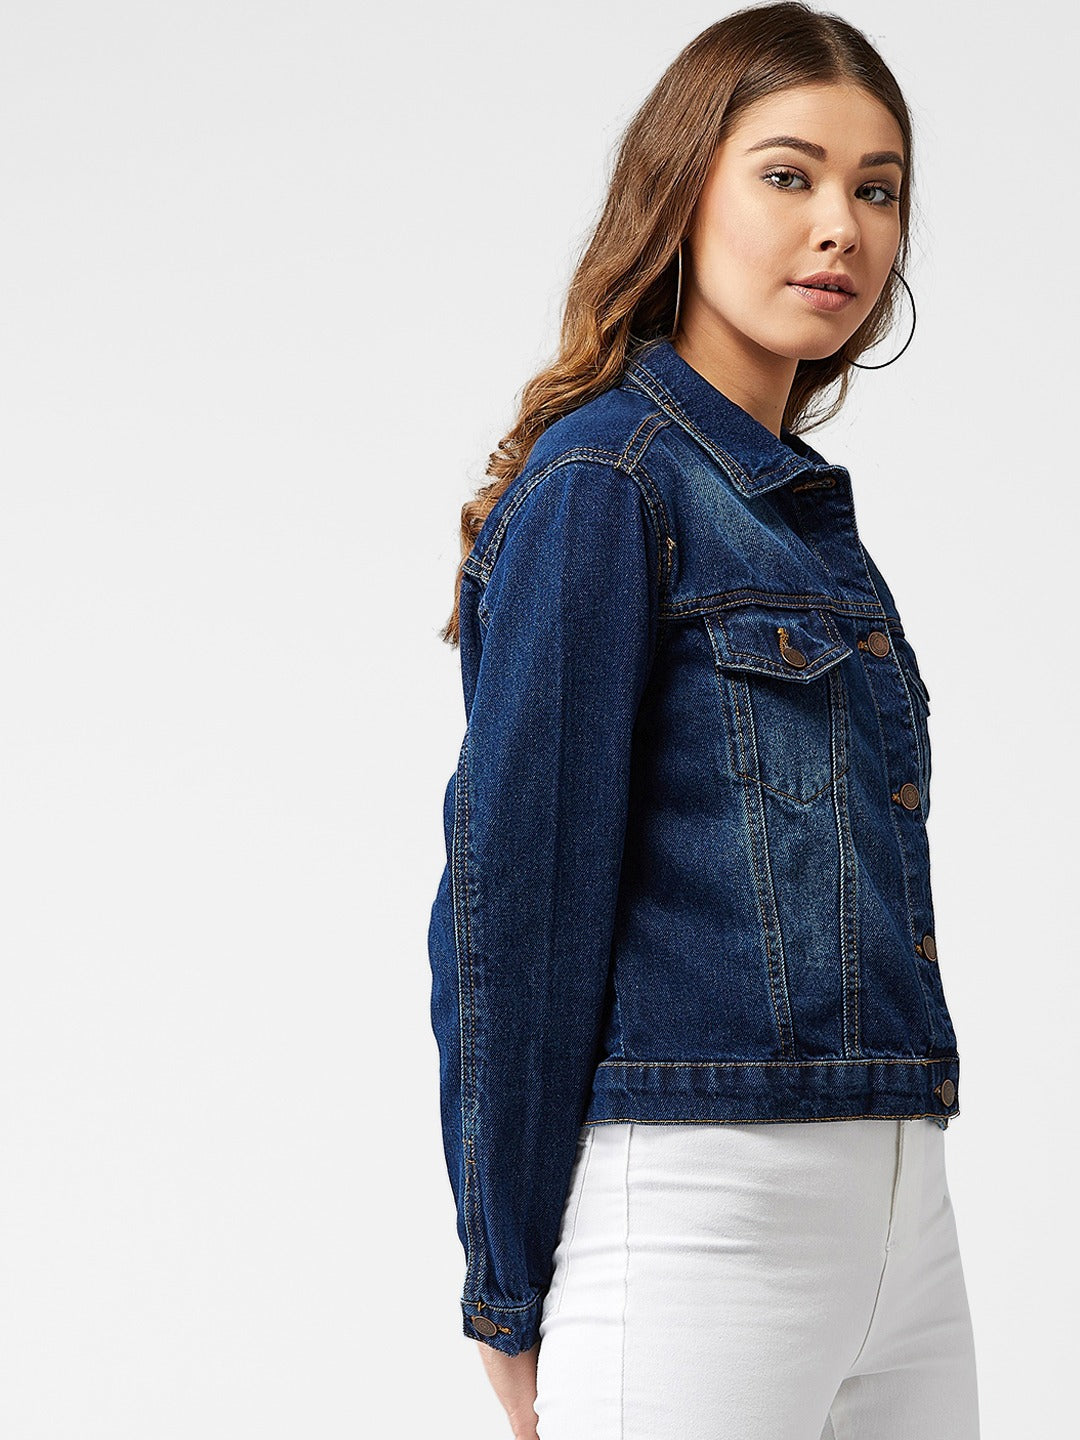 Women's blue solid denim jacket with classic design and pockets, shown in a studio setting.